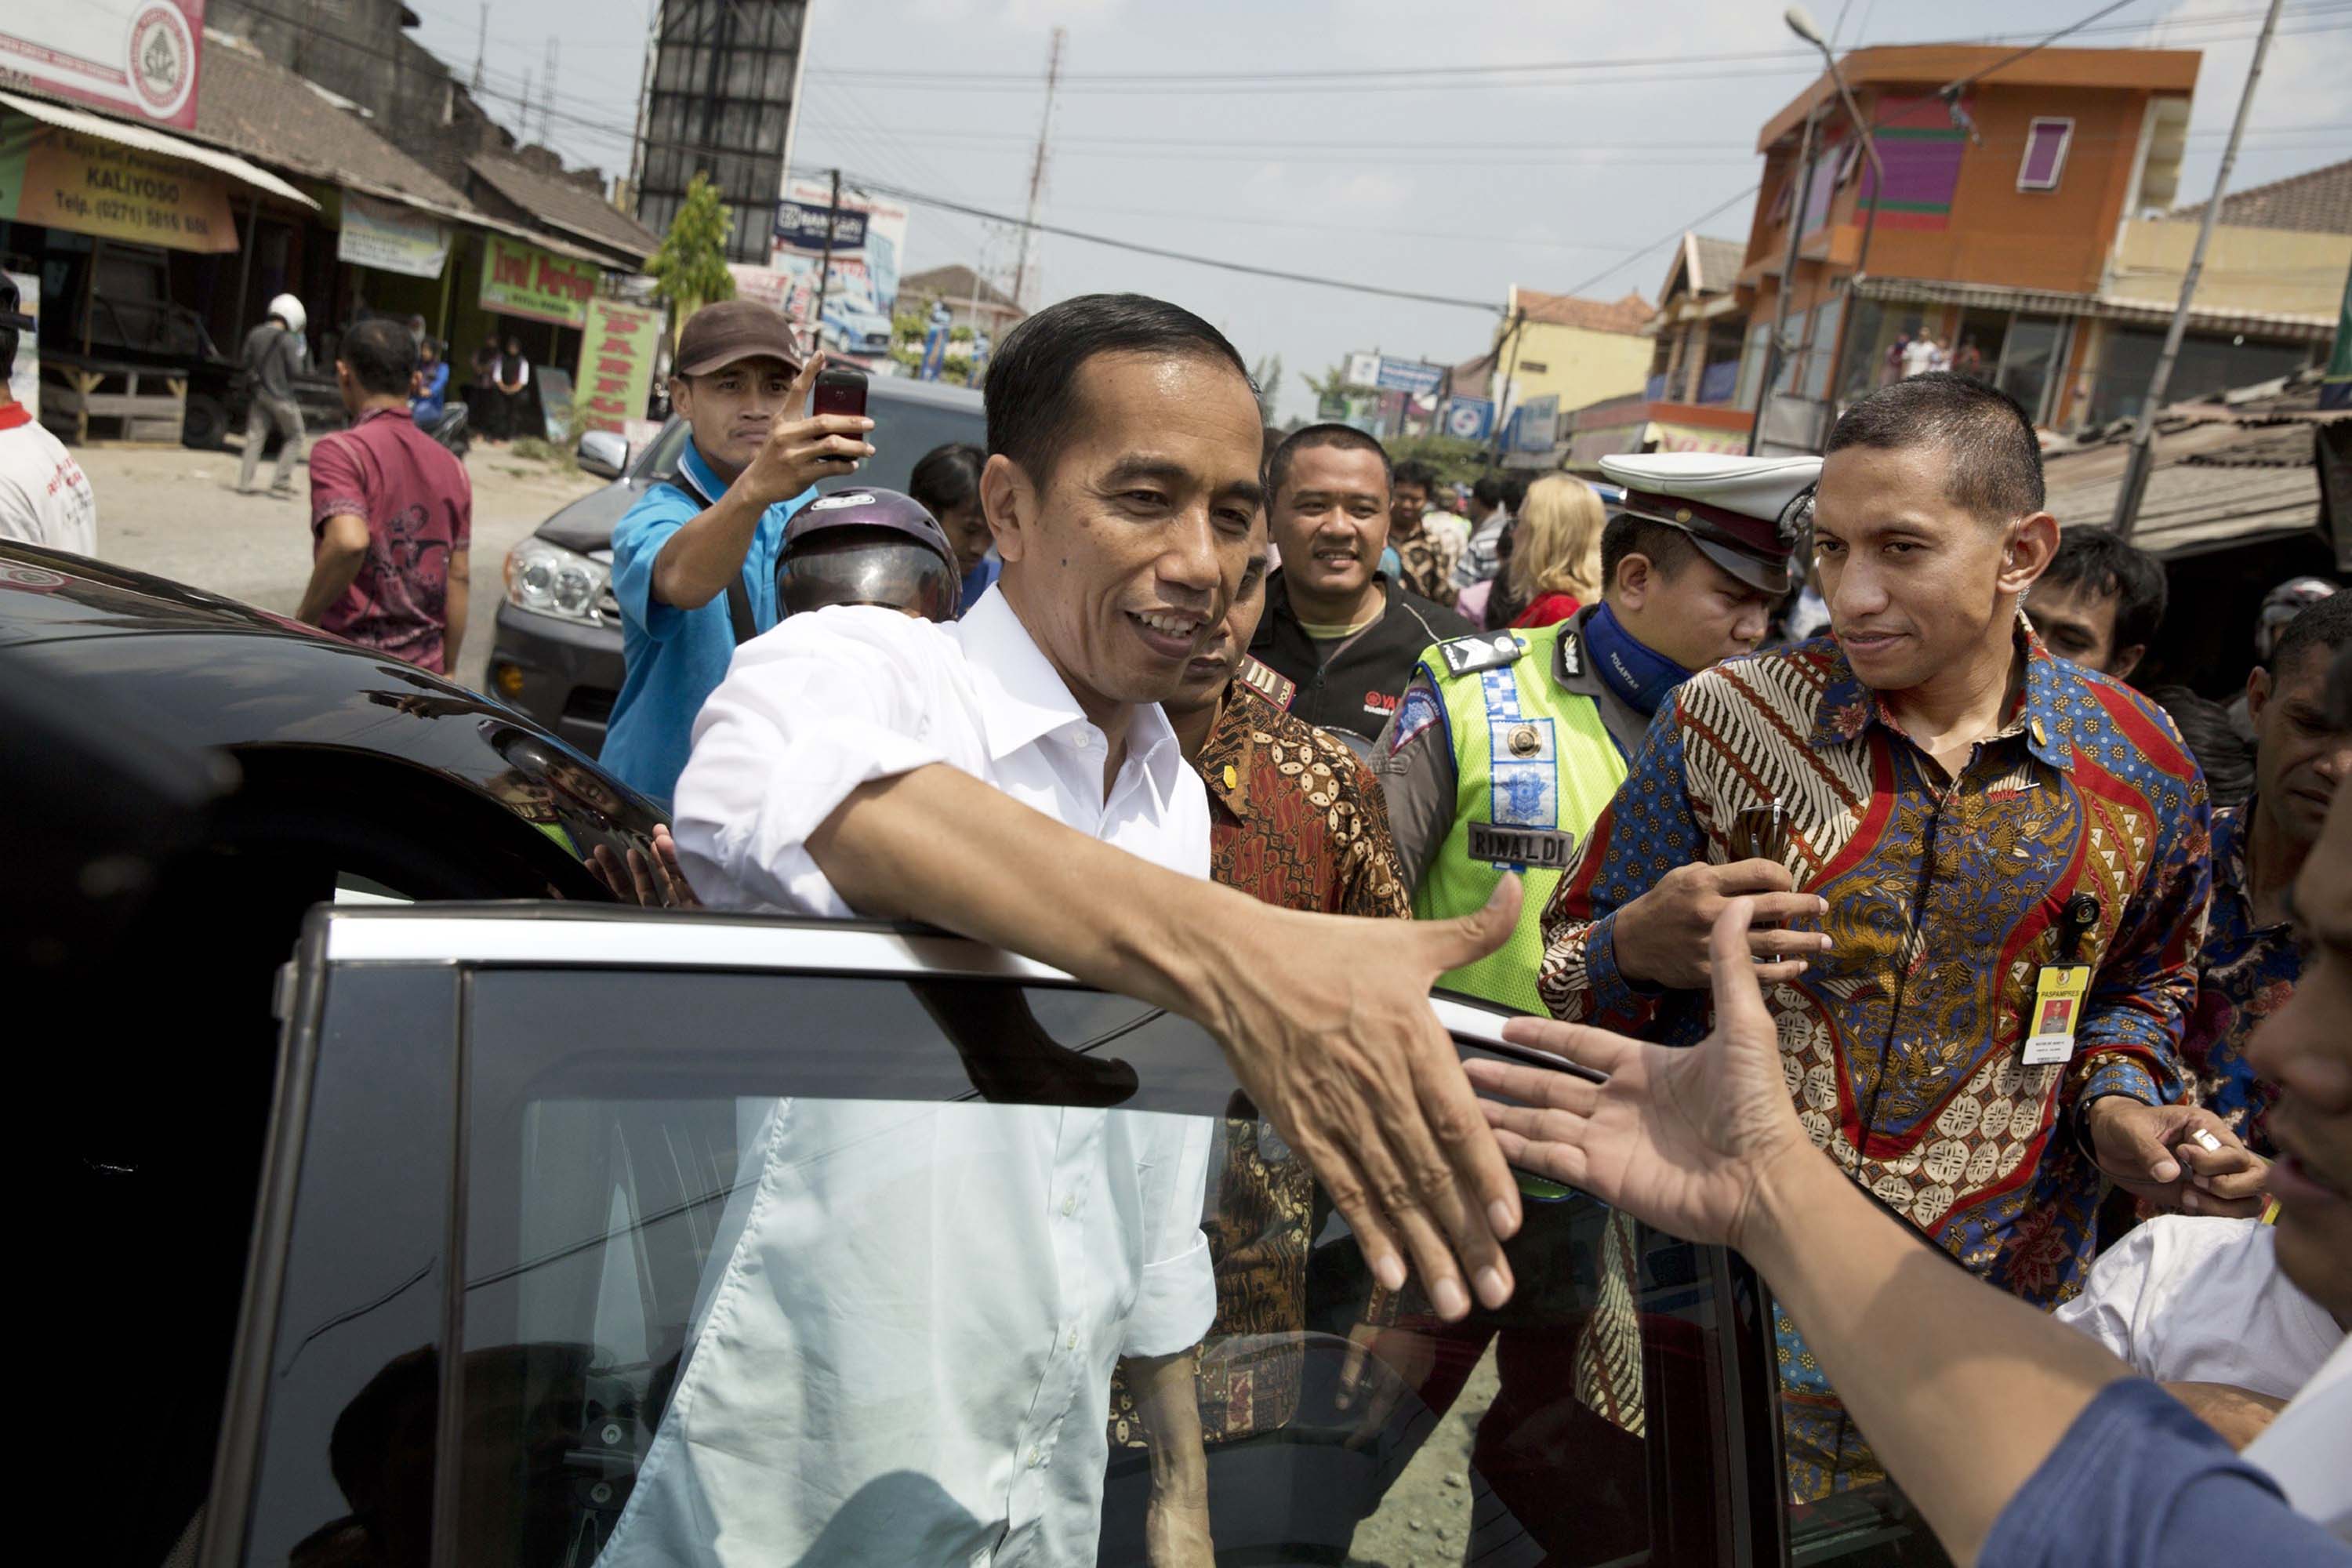 Because of Jokowi’s humble roots, many expect him to understand the problems of ordinary citizens (Photograph by Adam Ferguson for Time)